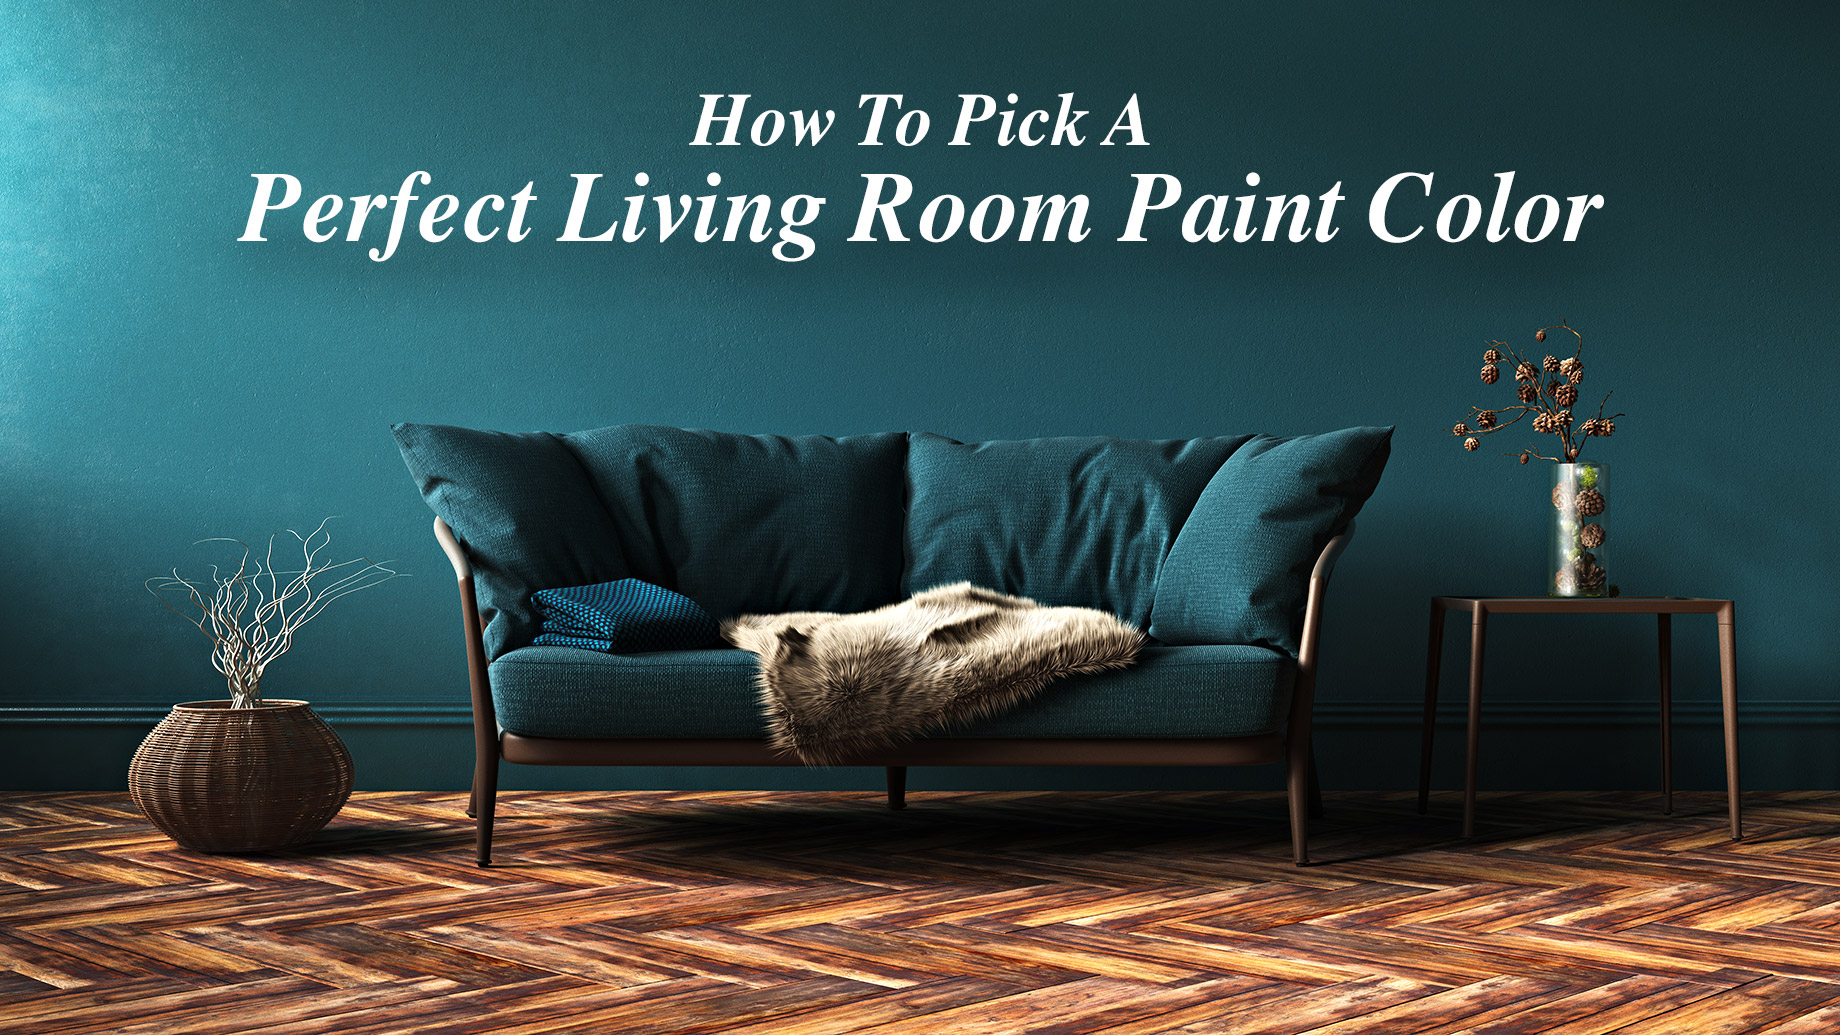 How To Pick A Perfect Living Room Paint Color